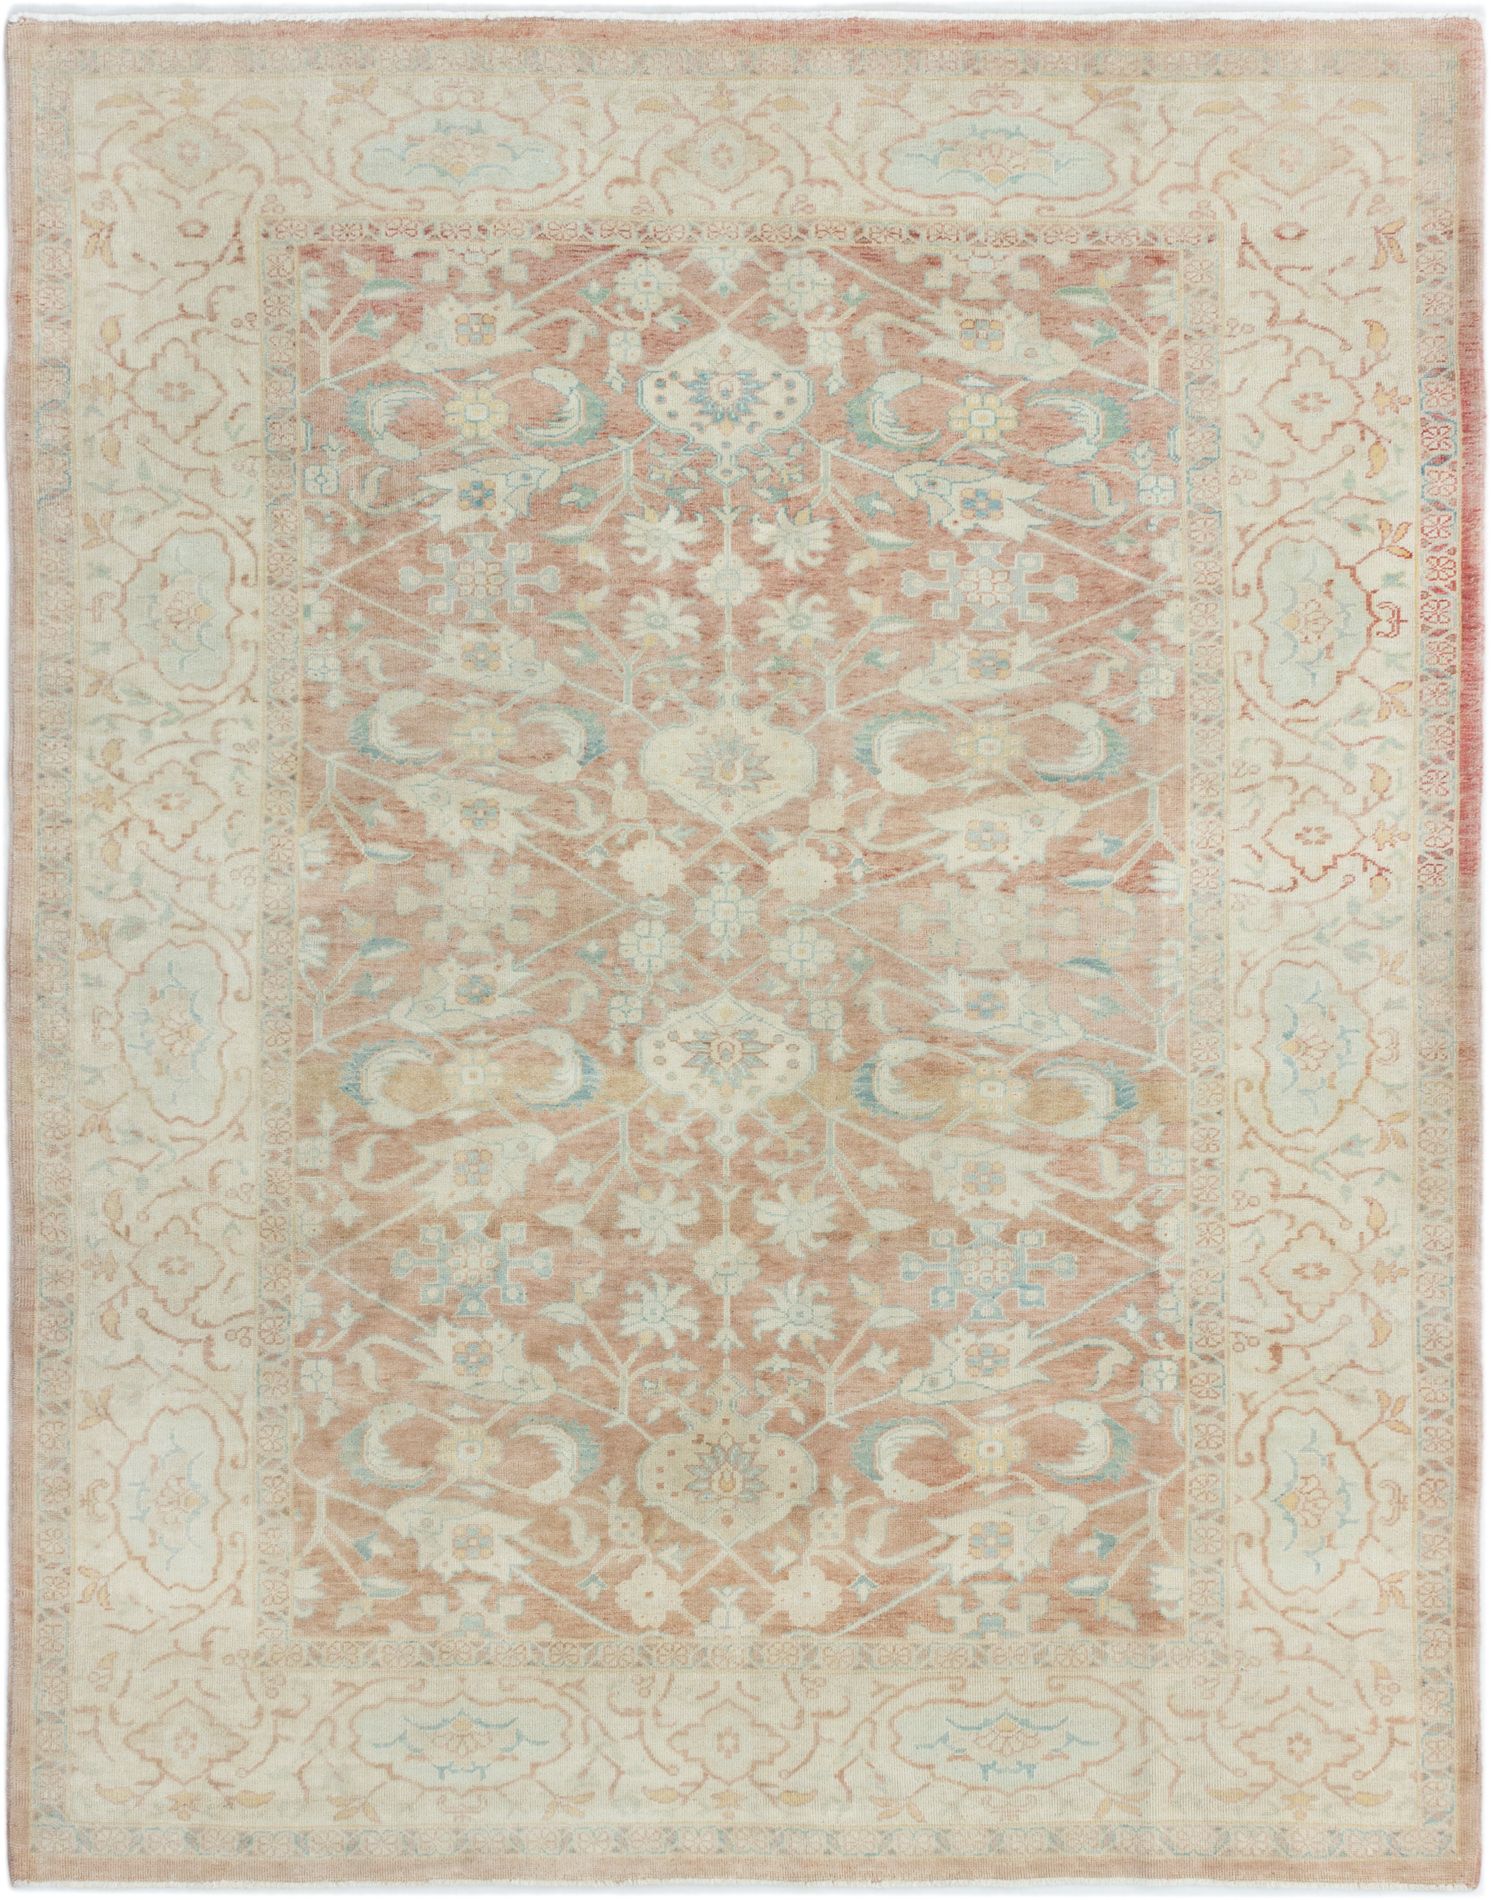 Hand-knotted Authentic Ushak Copper Wool Rug 6'5" x 8'0" Size: 6'5" x 8'0"  